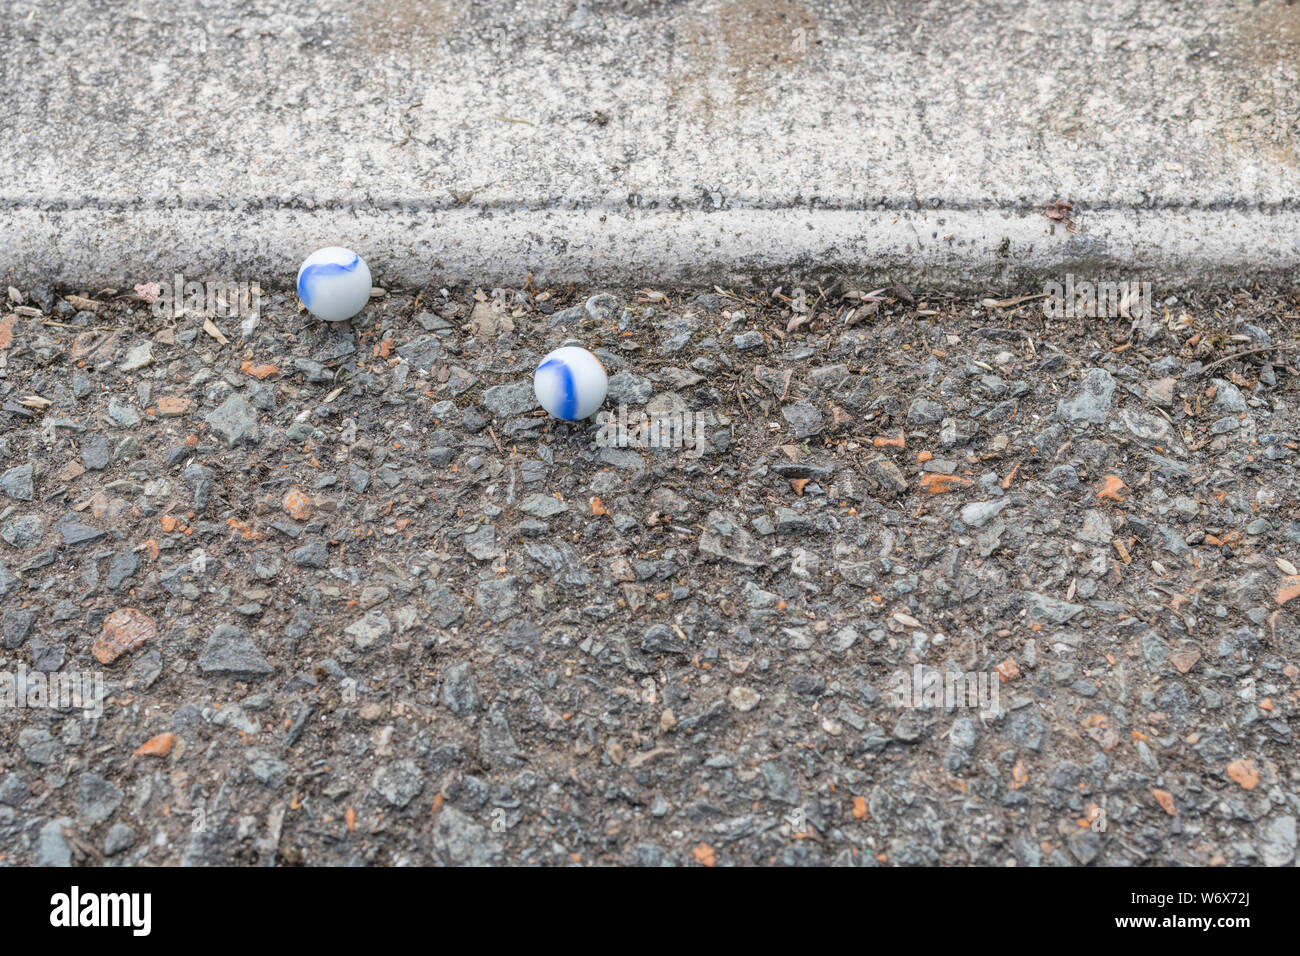 White glass marbles on kerbside tarmac surface. Metaphor something lost, mental health, losing your marbles, childhood games. Stock Photo